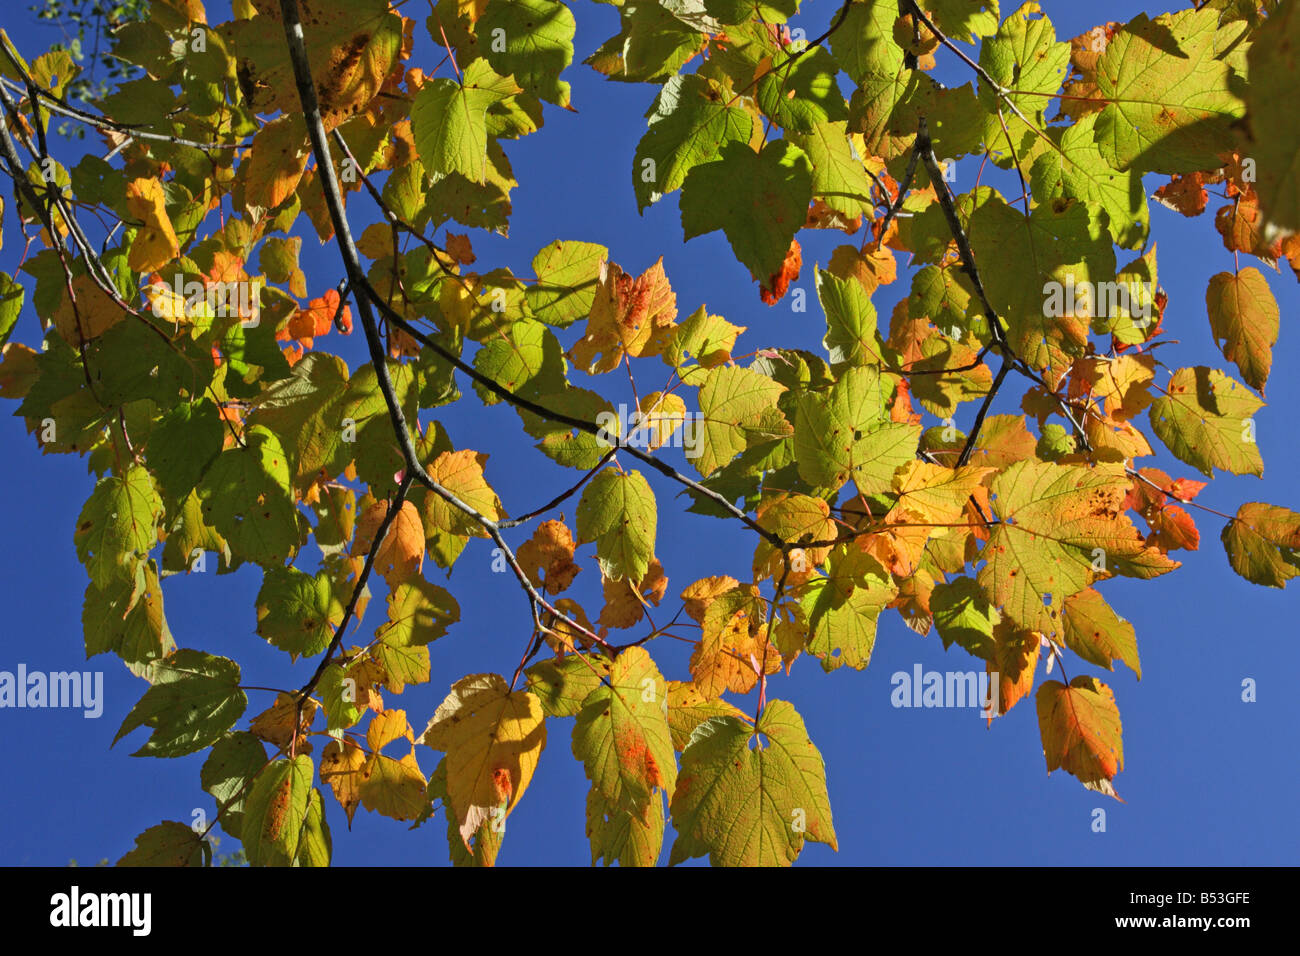 Fall colour leaves red yellow and orange and green against a clear blue sky Stock Photo